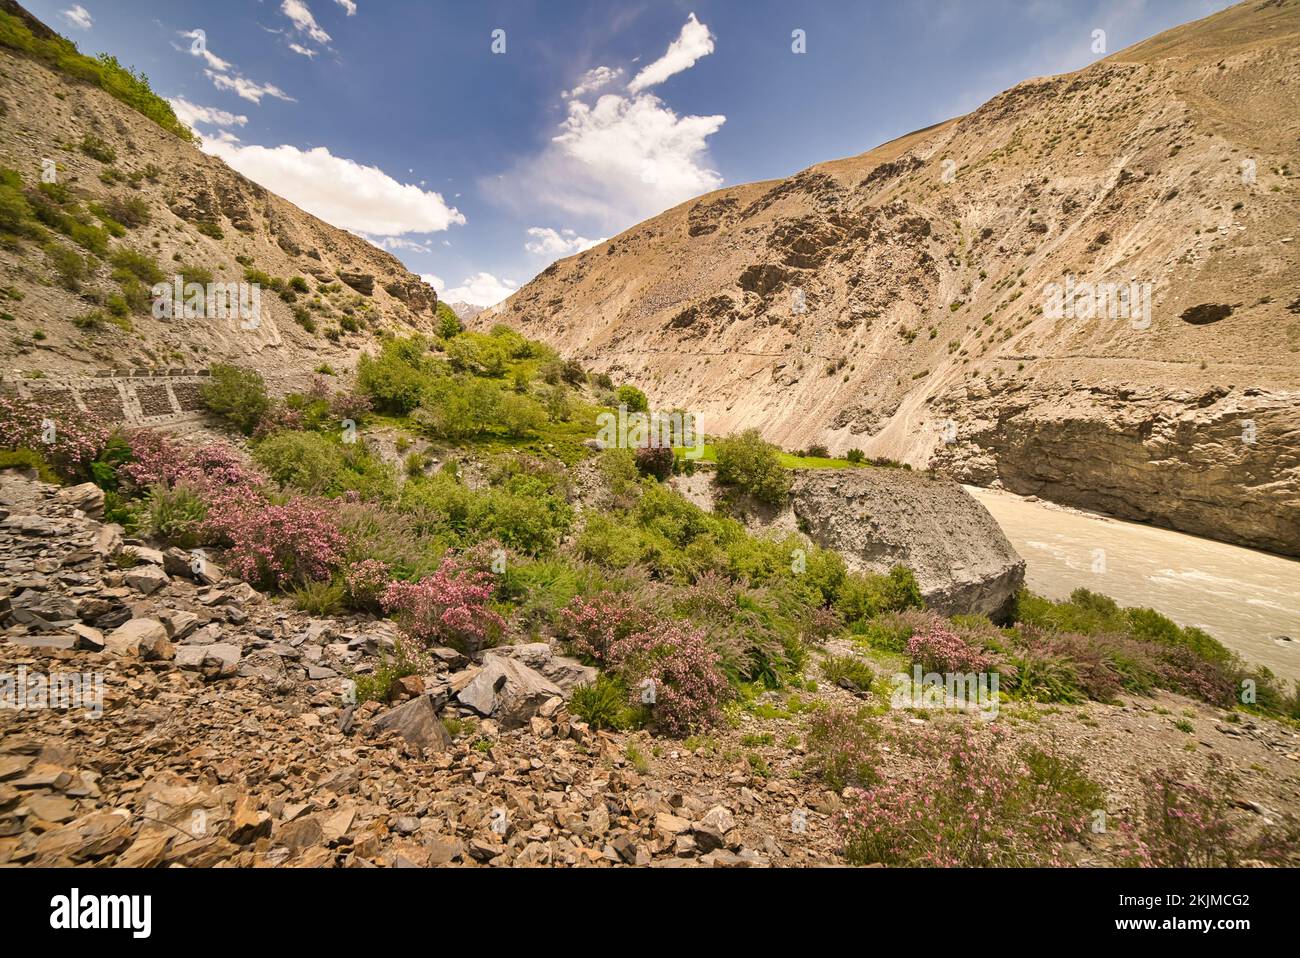 Scenic view of mountain cold desert with pink flowers and foliage en route to Zanskar in Ladakh state of India Stock Photo